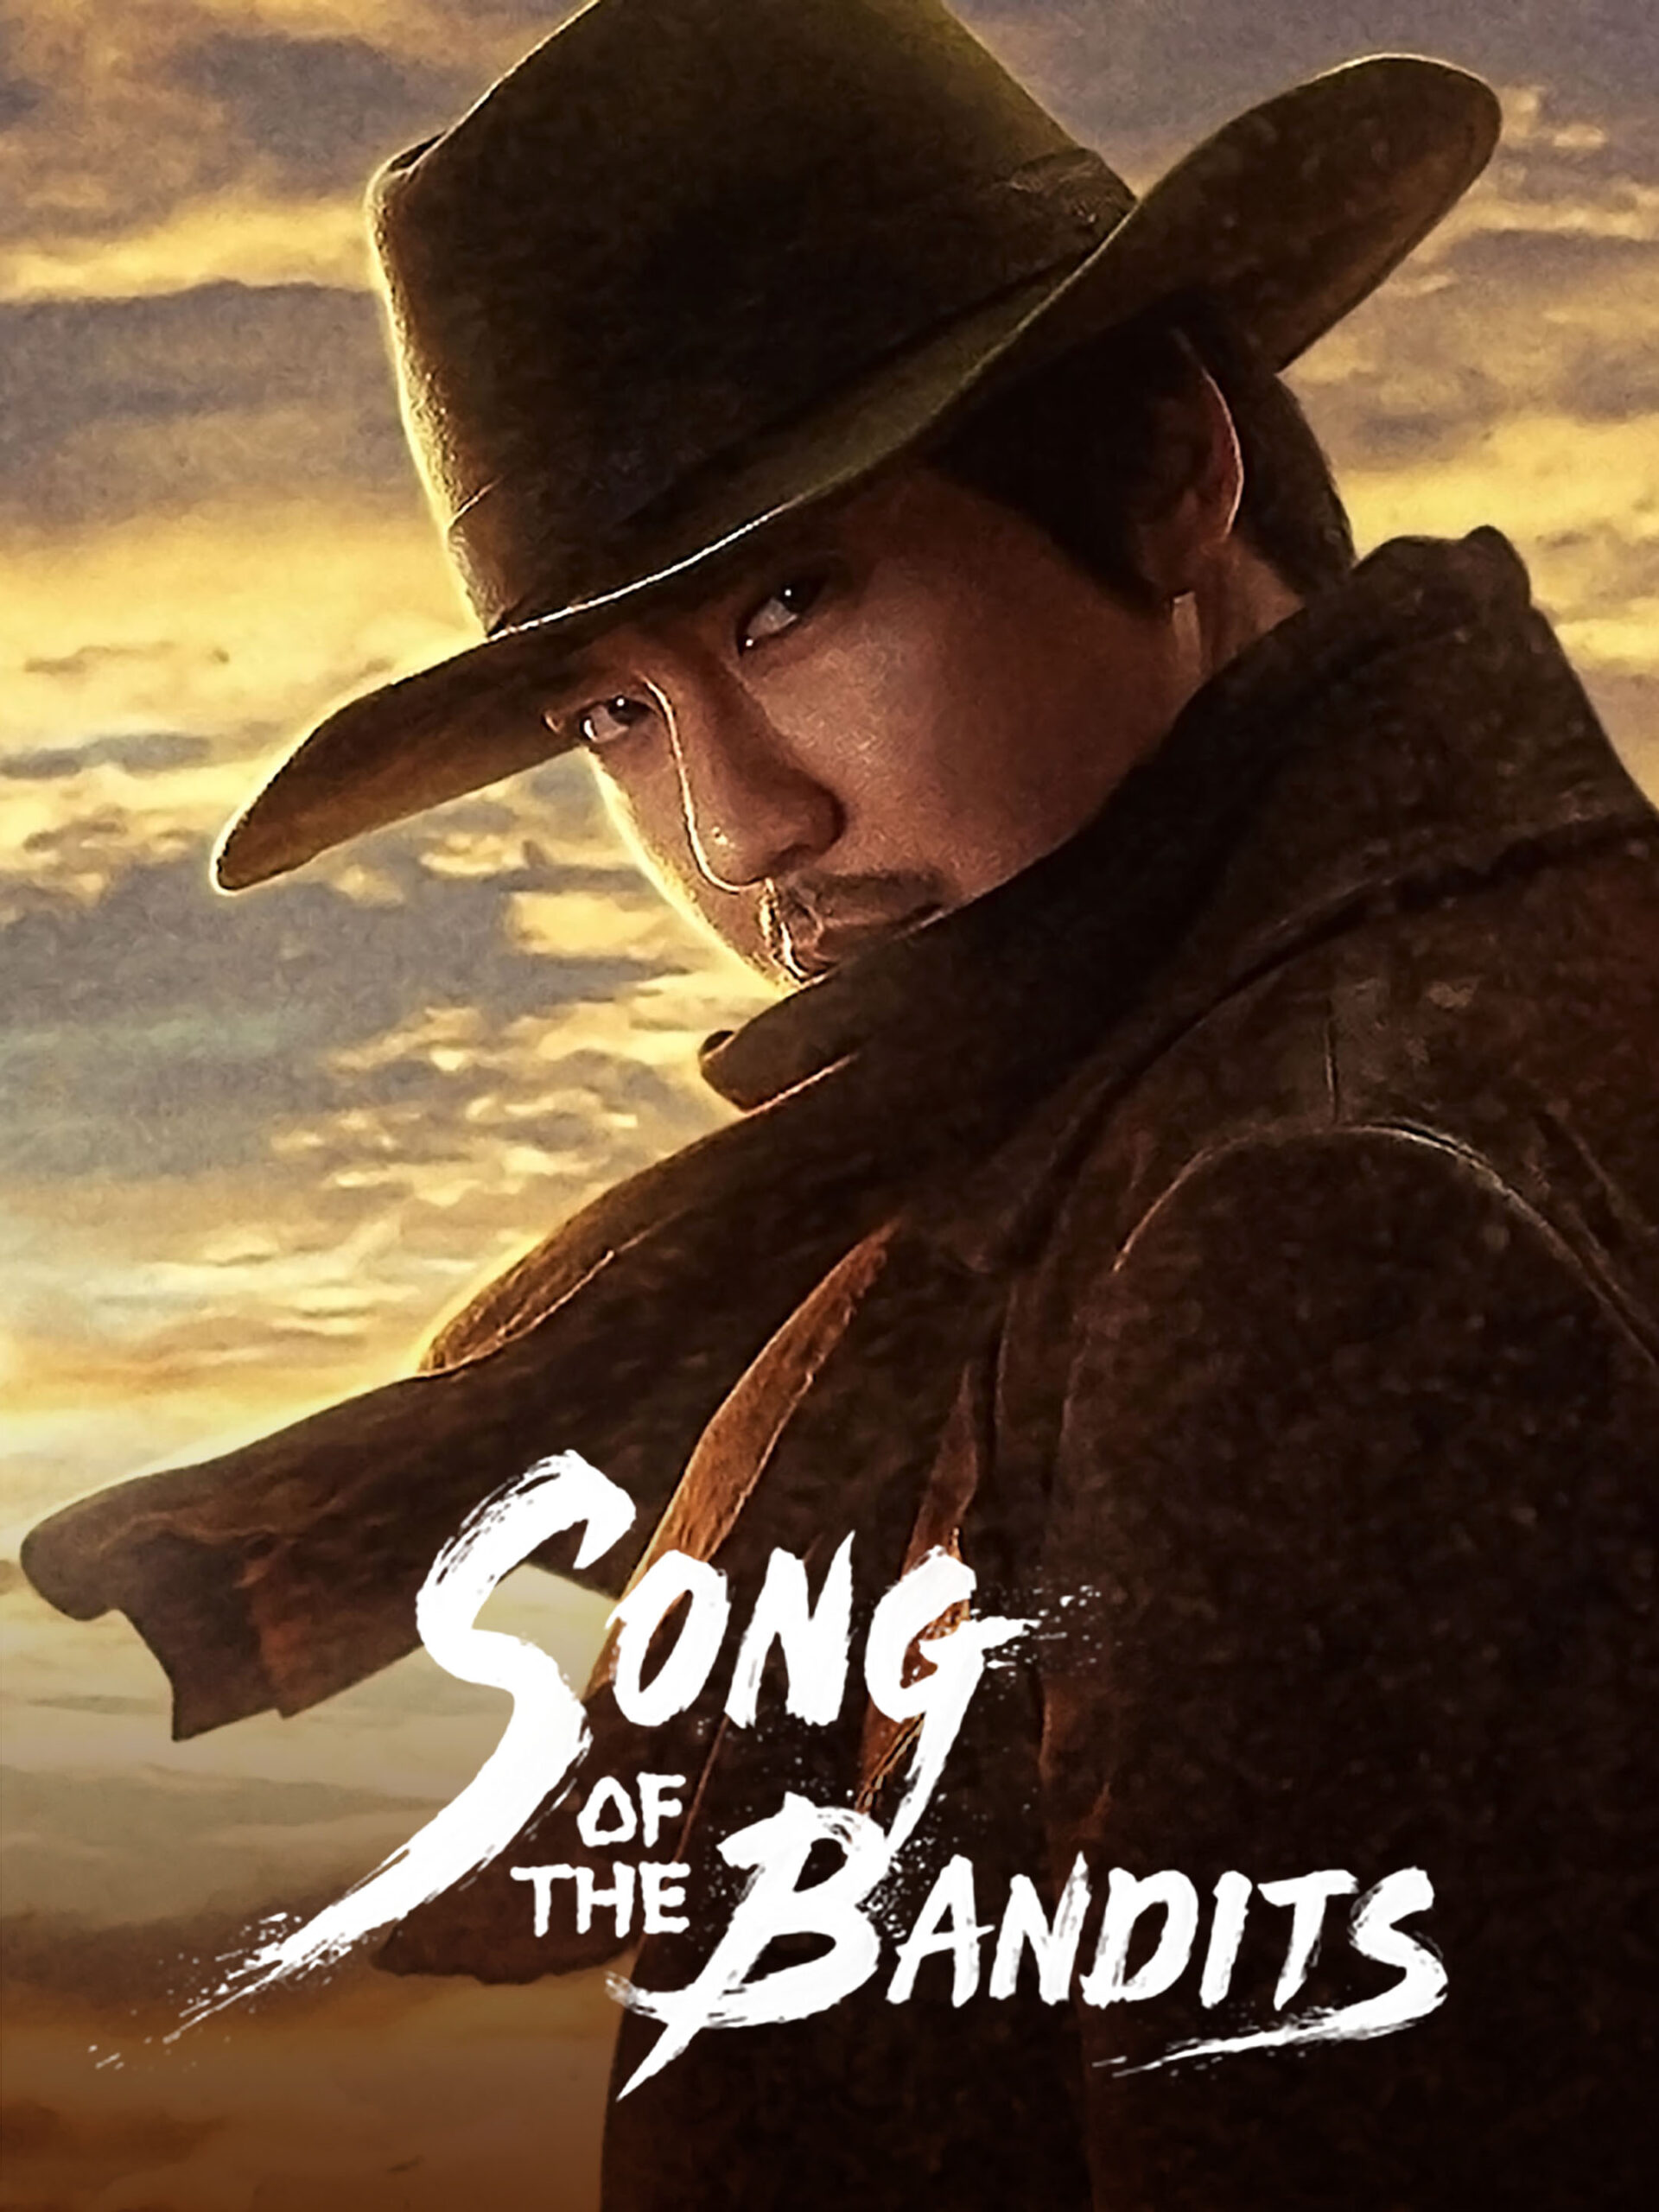 Song of the Bandits - Unspoiled Review